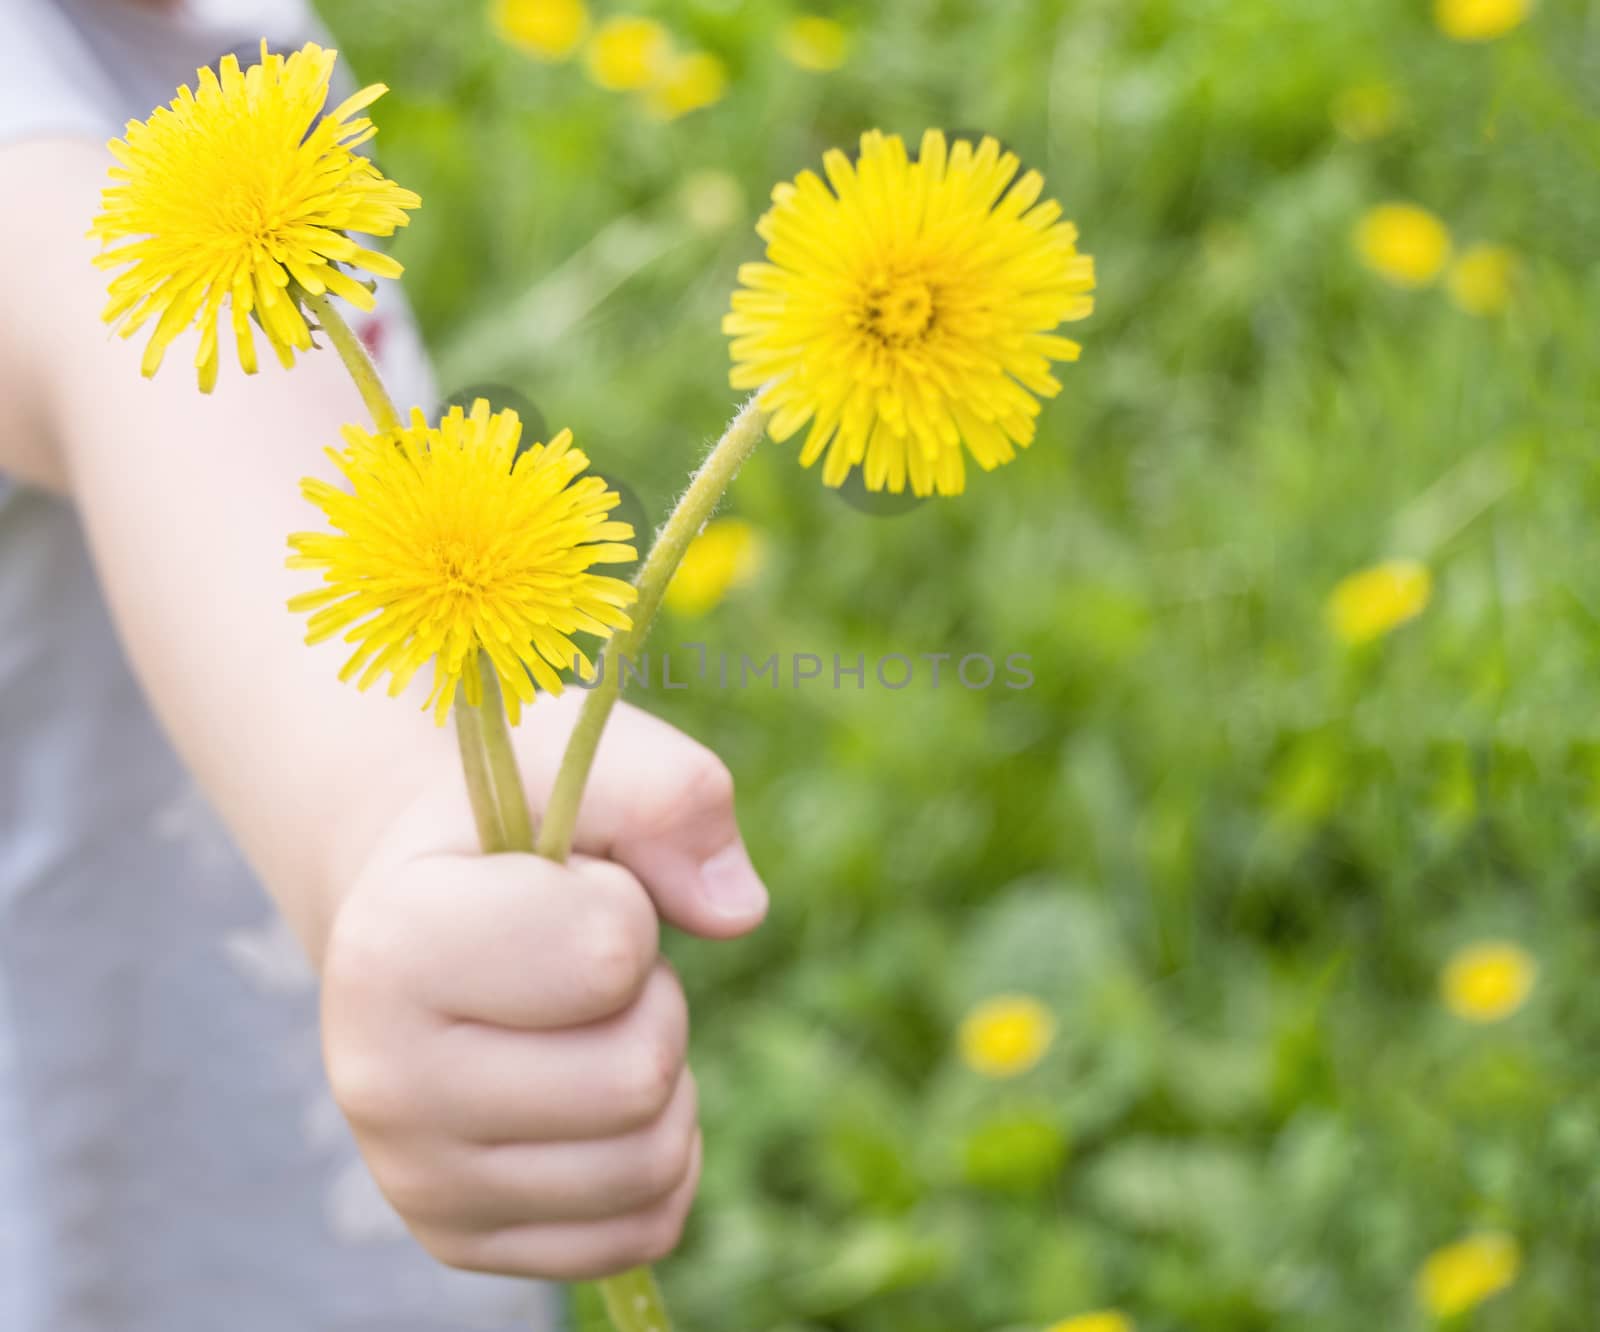 The concept of a happy childhood, yellow dandelions in the hand of a child on a blurred background of nature, in the open.